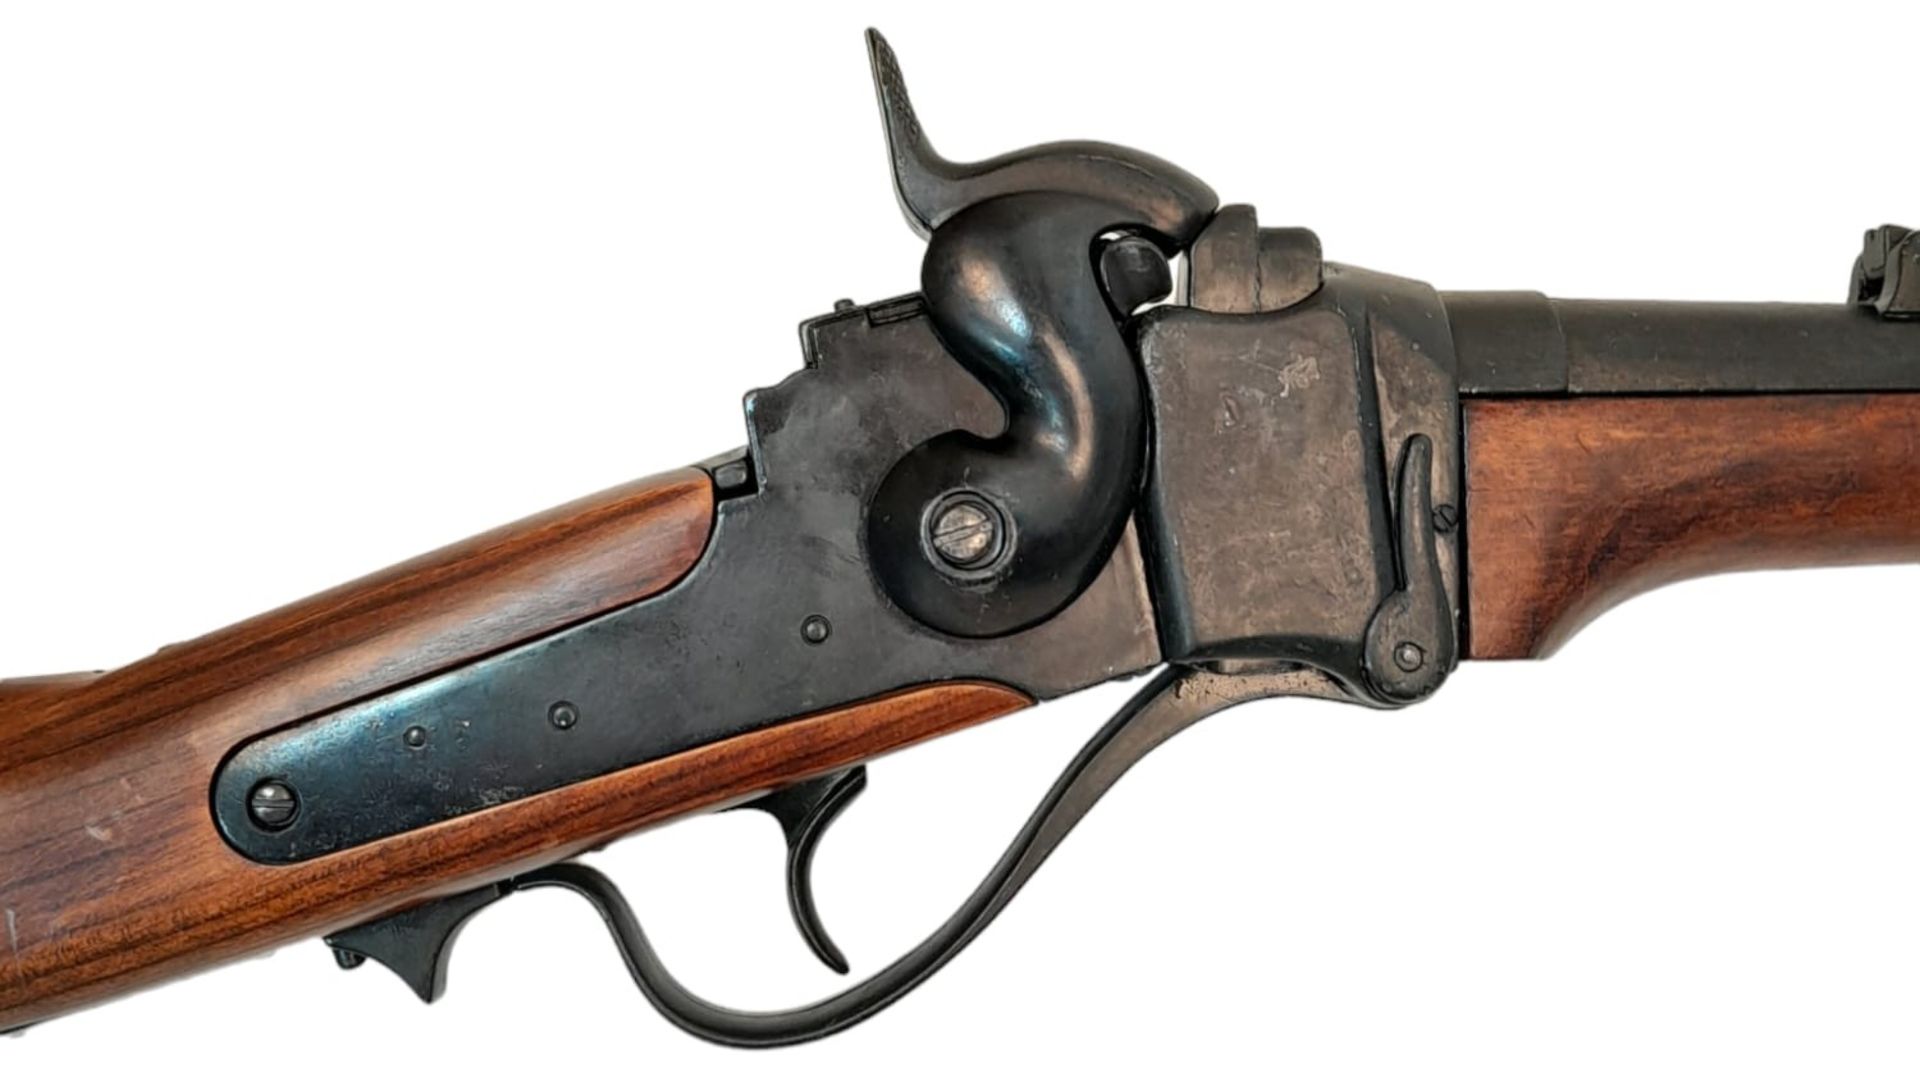 A Vintage, Full Weight and Size, Retrospective Inert Replica of an 1859 Carbine Rifle. Wood and - Image 8 of 11